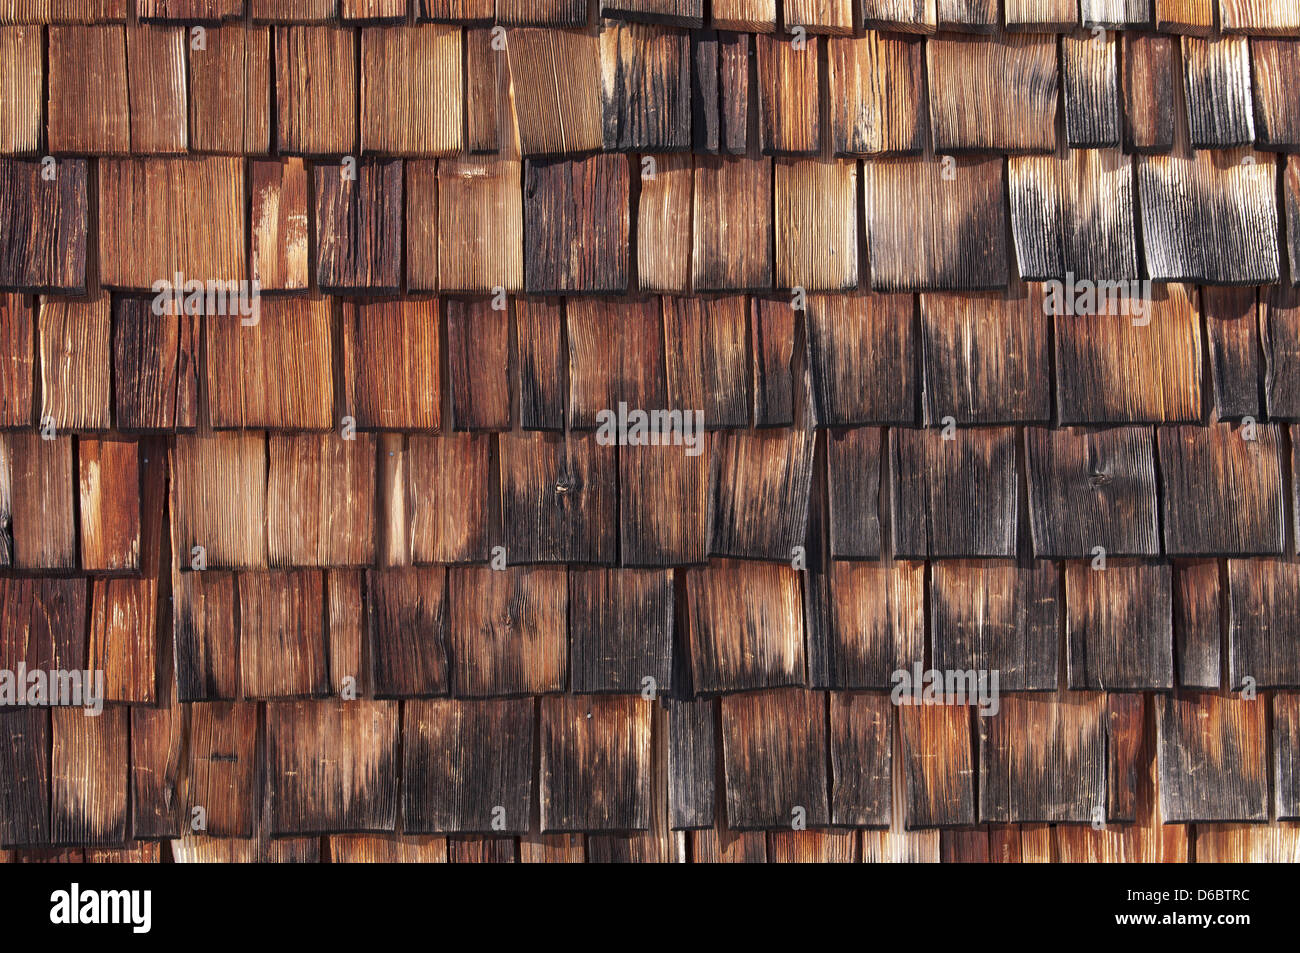 Texture - wooden shingles are tapered pieces of wood primarily used to cover roofs and walls of buildings, Bavaria, Germany. Stock Photo